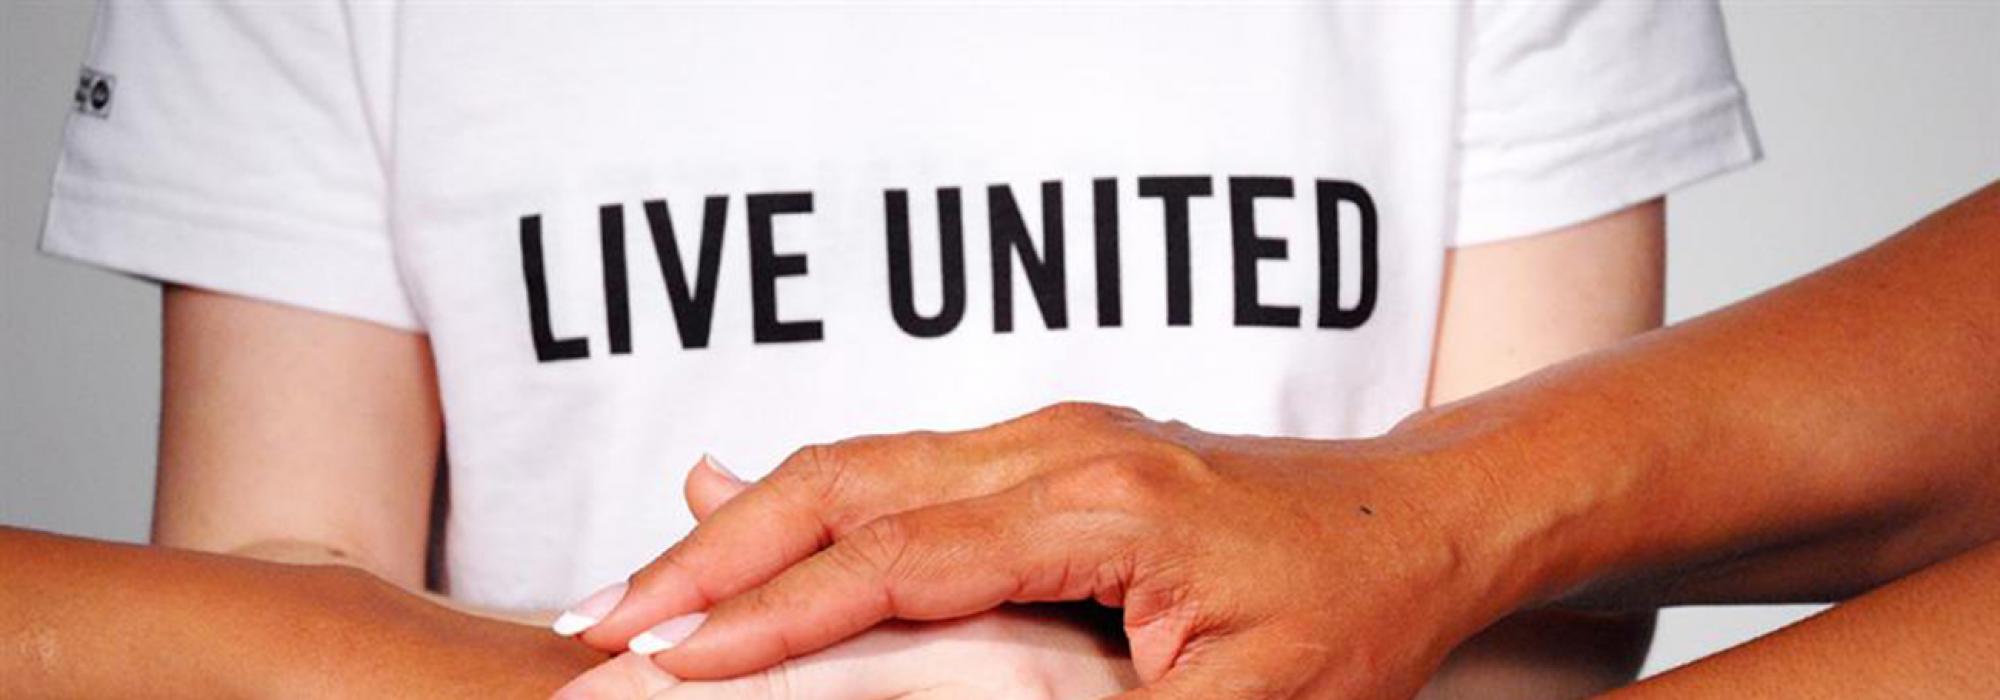 Why give to United Way?